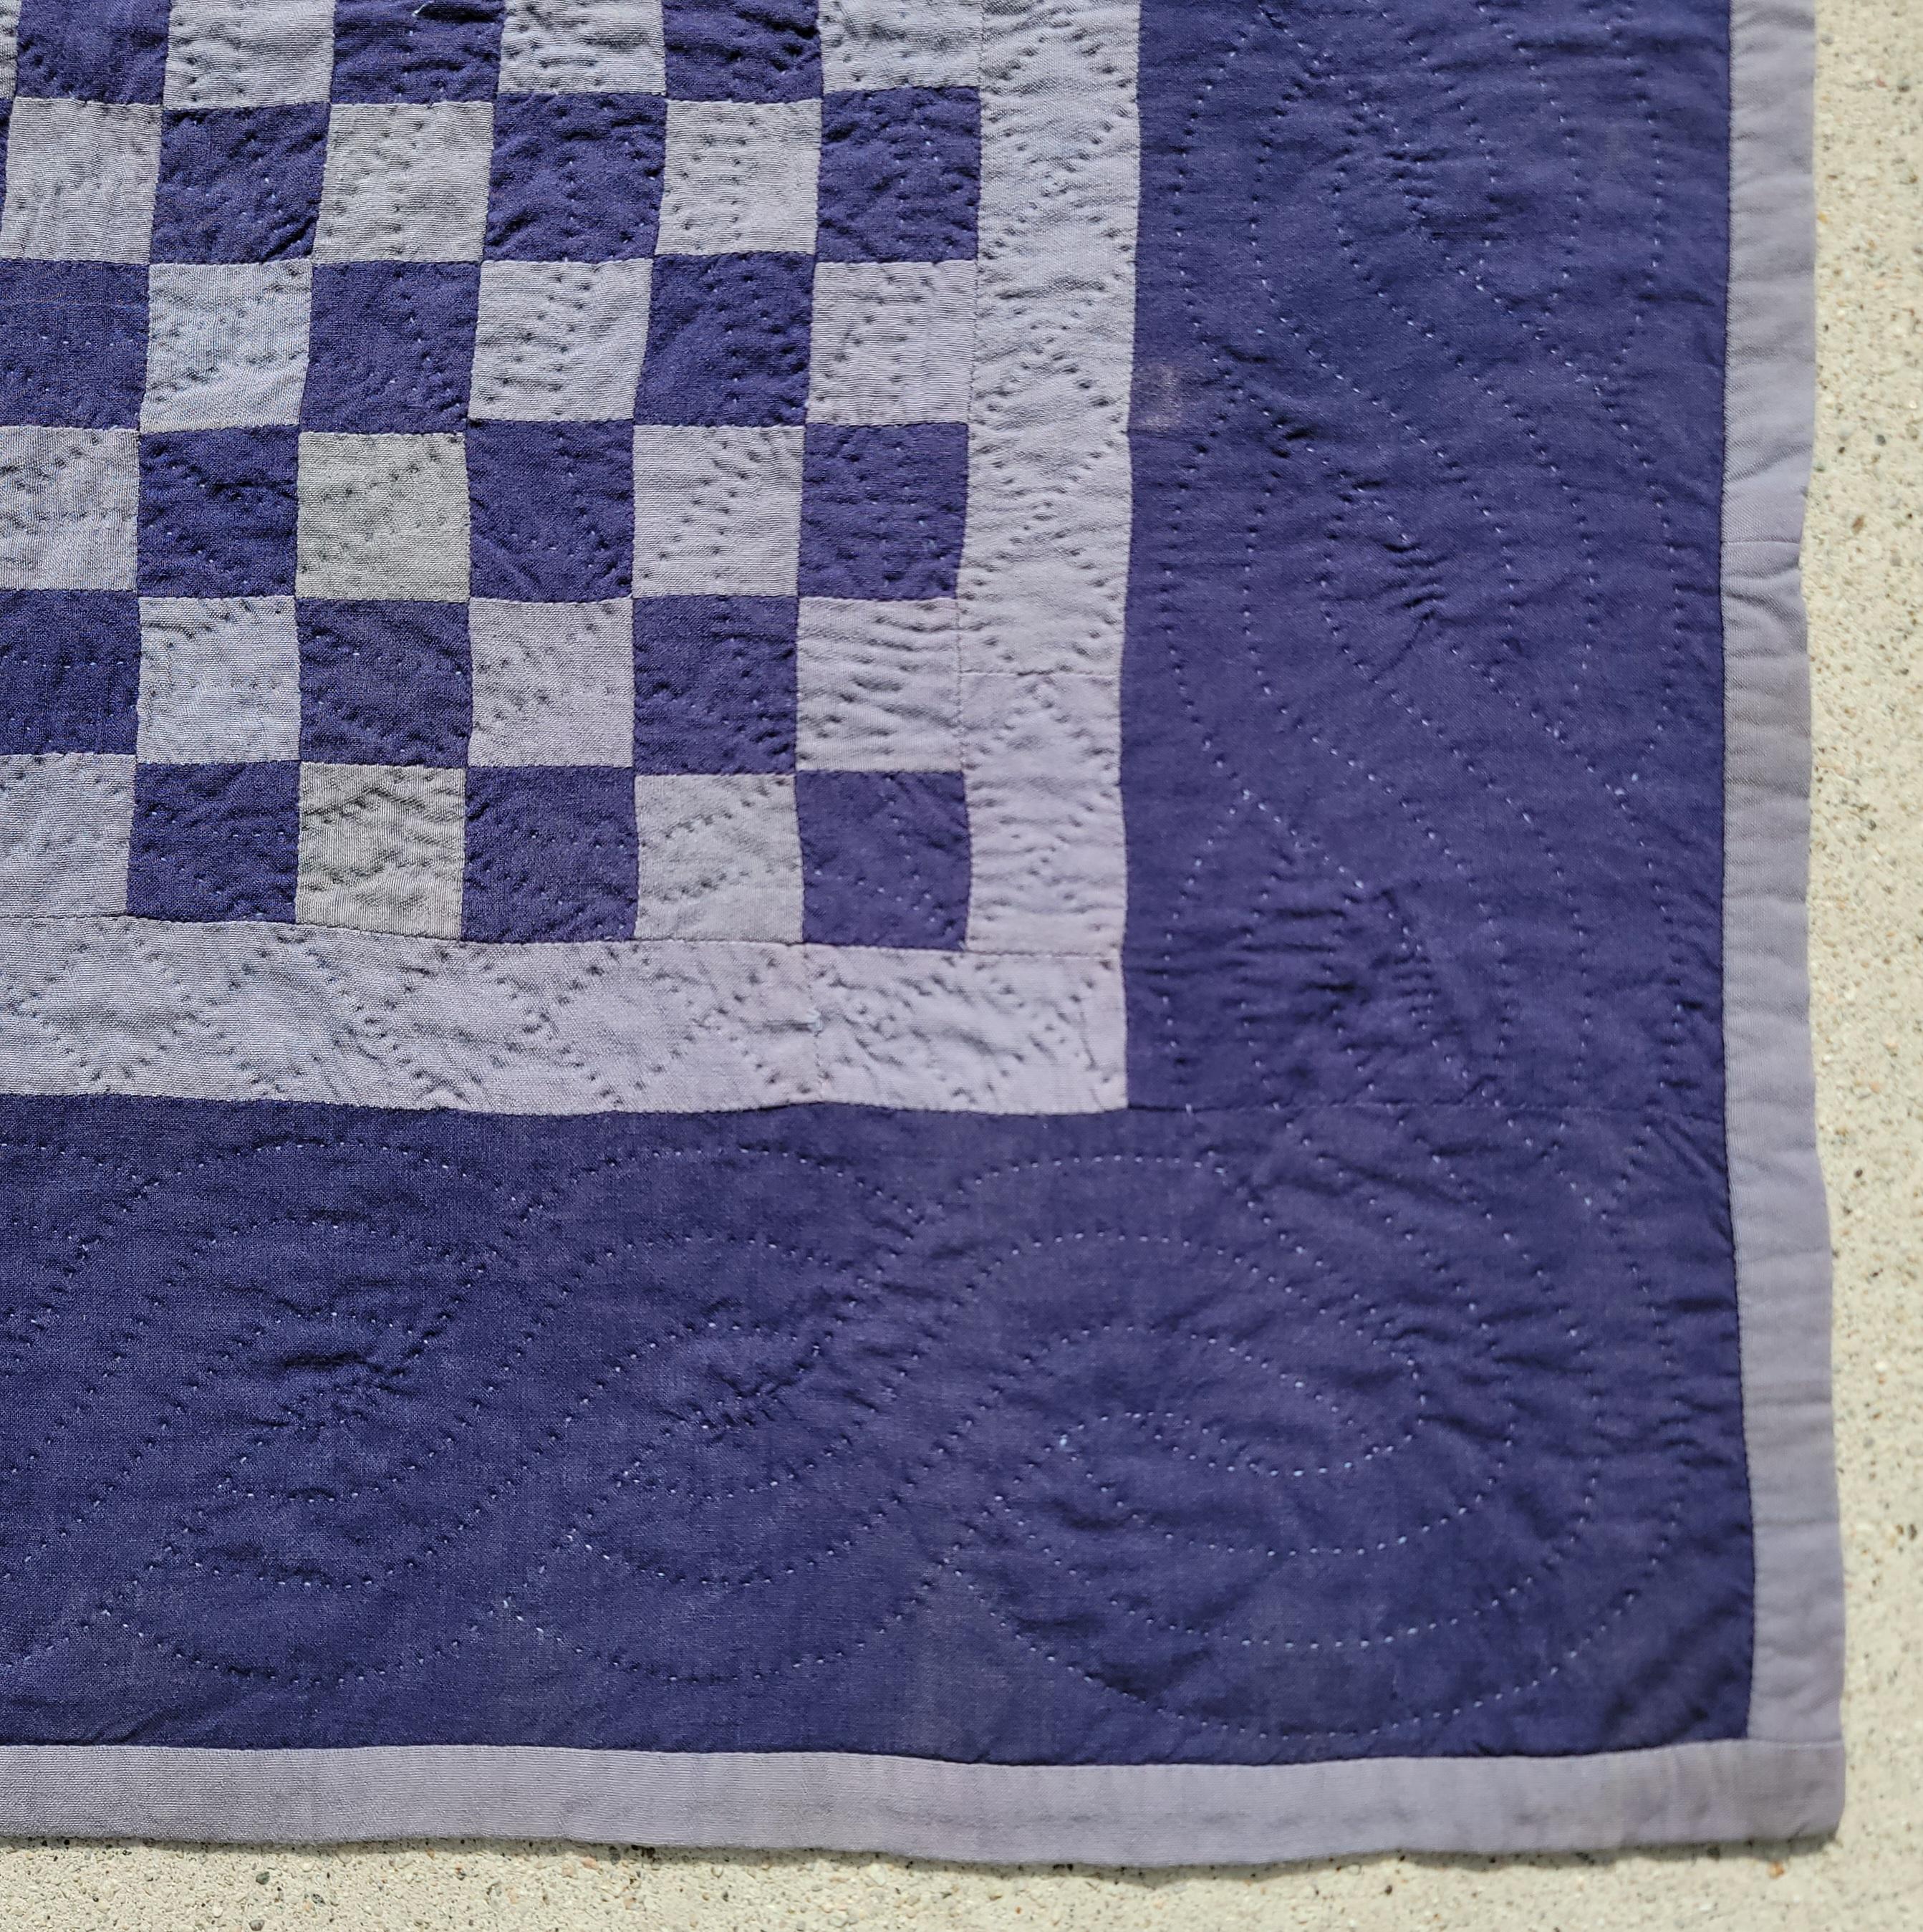 Amish Holmes County,Ohio one patch crib quilt is on a blue ground and light purple blocks.The condition is very good with nice tight stitching & piecework. This comes to us from a private collection in California.